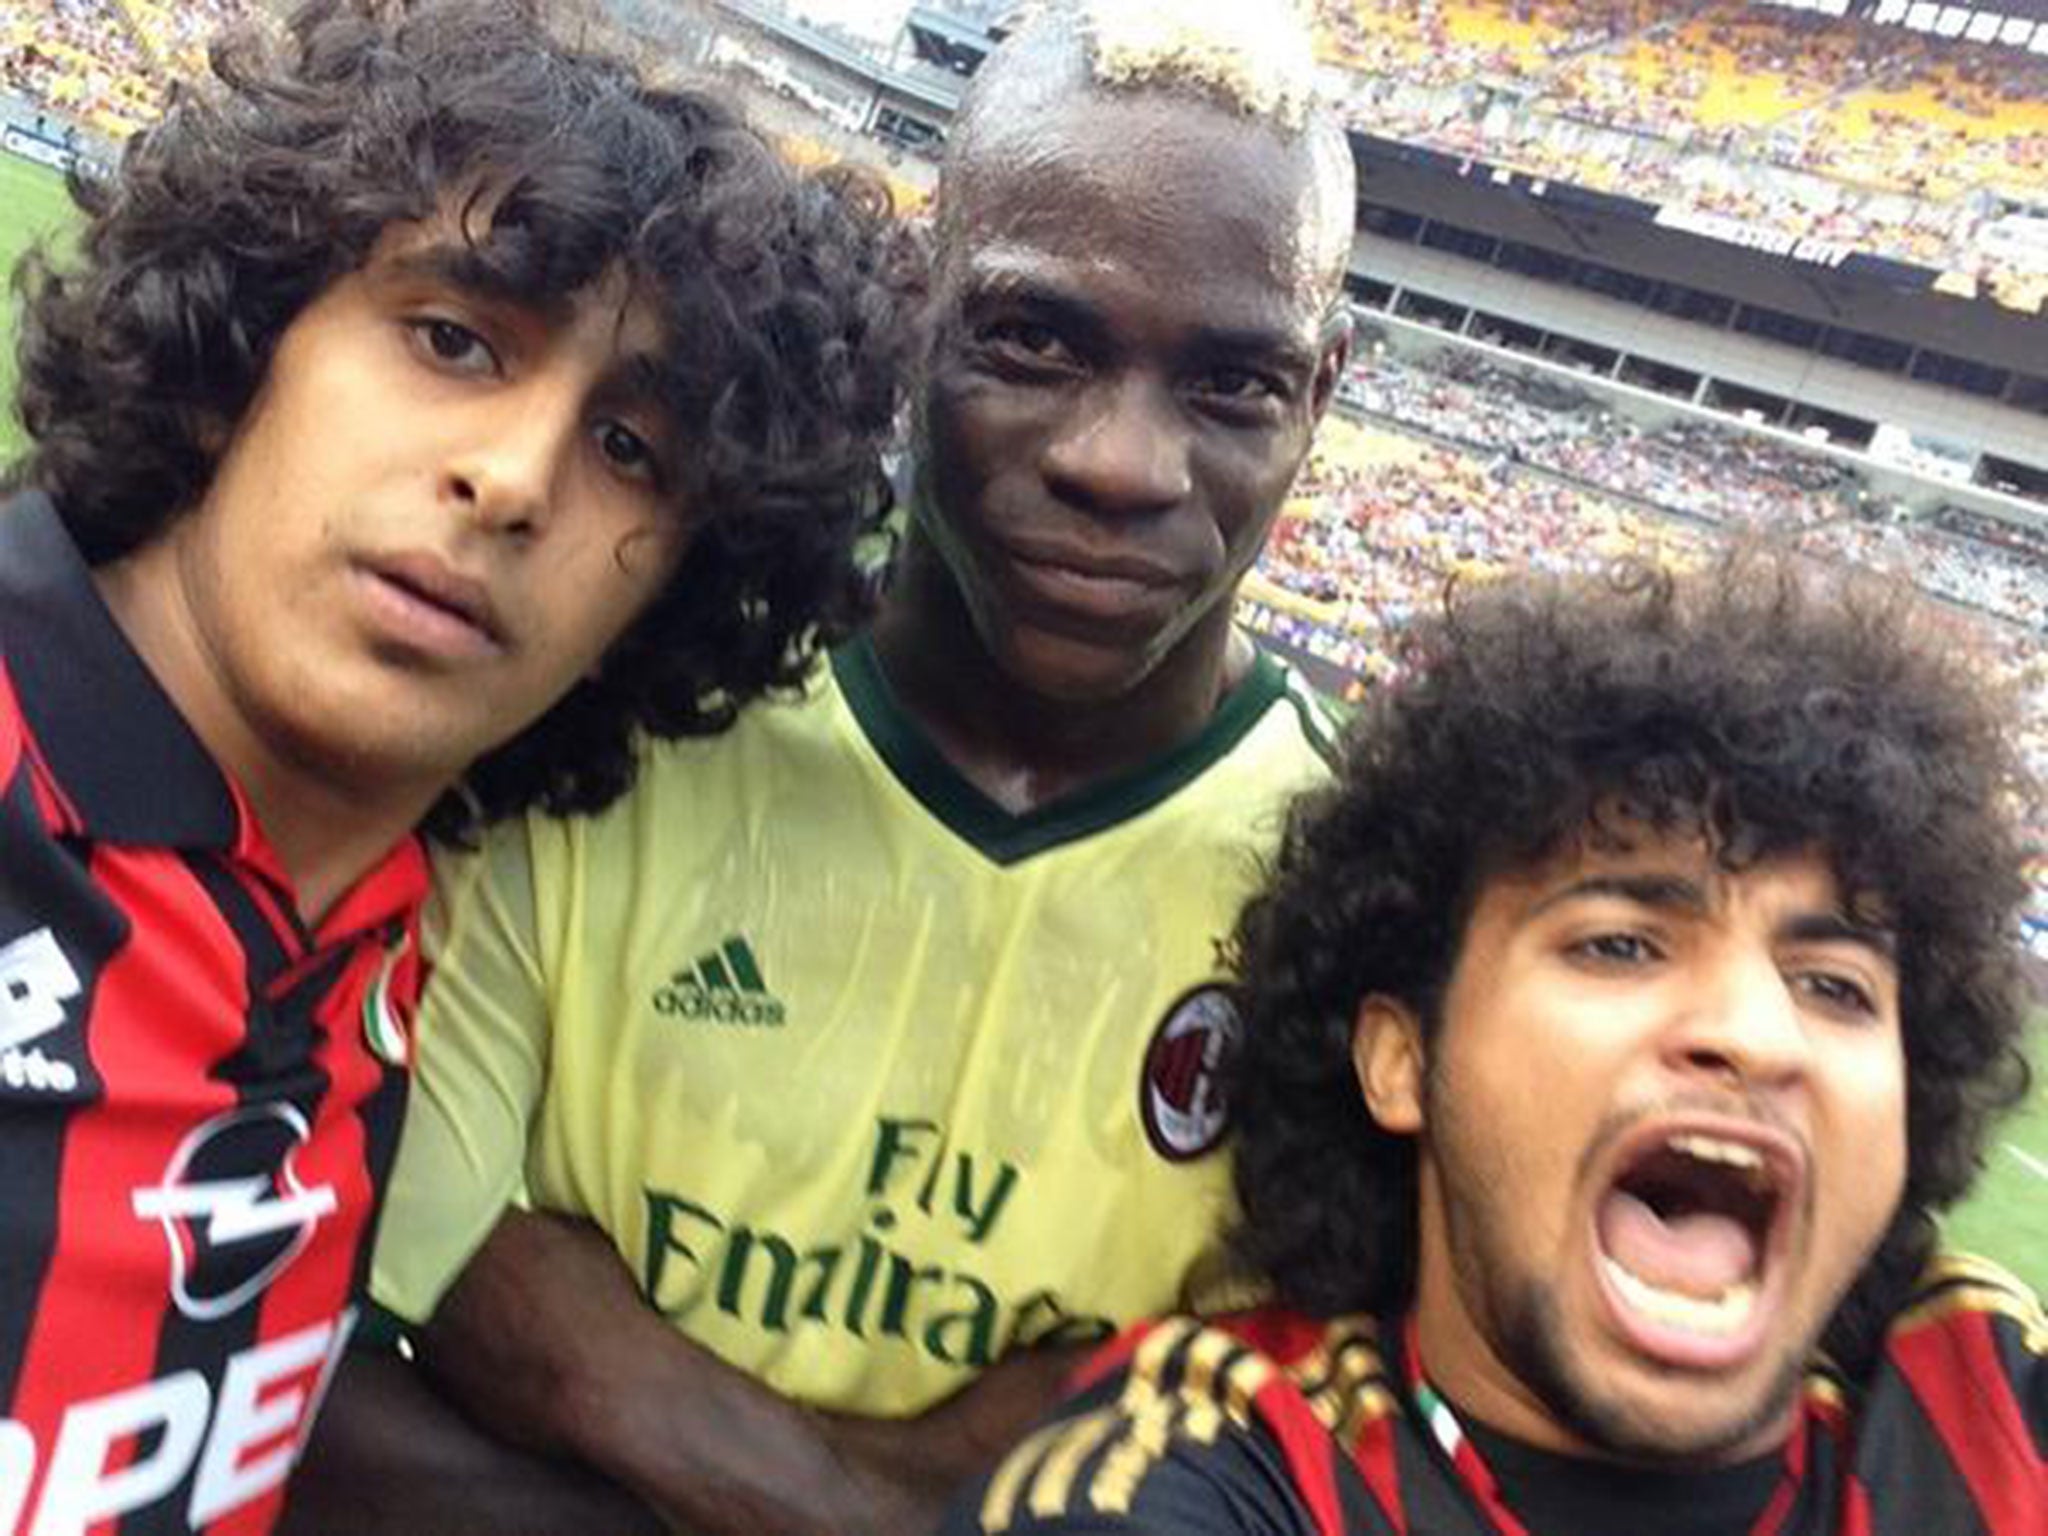 Mario Balotelli posed for this selfie during AC Milan's 5-1 defeat to Manchester City